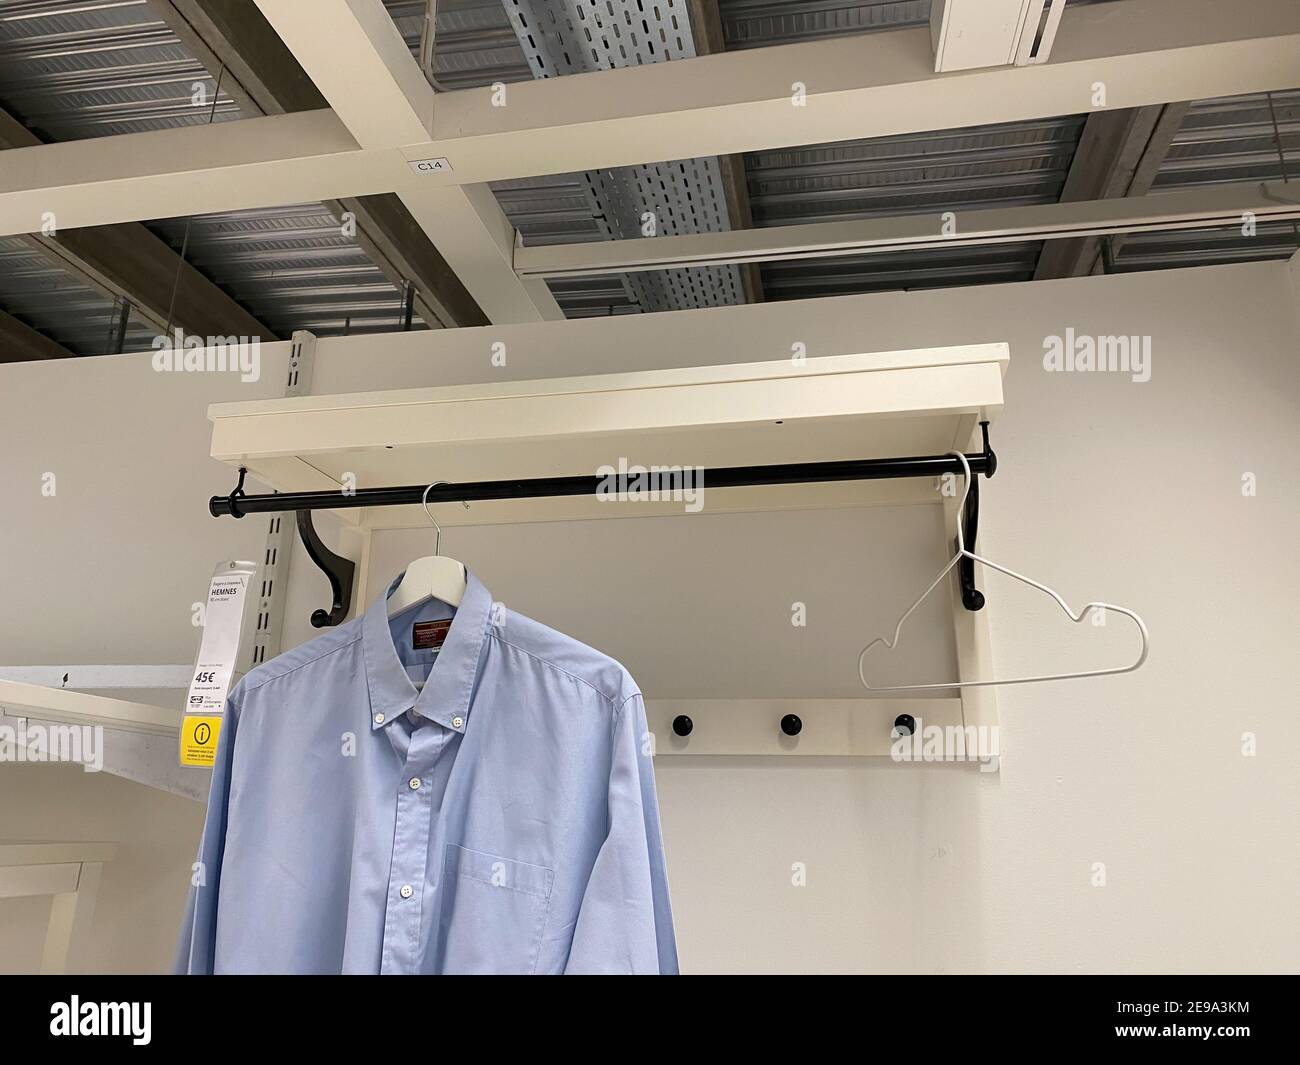 Paris, France - Jan 20, 2021: Ikea garderobe with Hemnes hanger with one  blue shirt for sale the price is 45 euros for the designed in Sweden piece  of furniture Stock Photo - Alamy